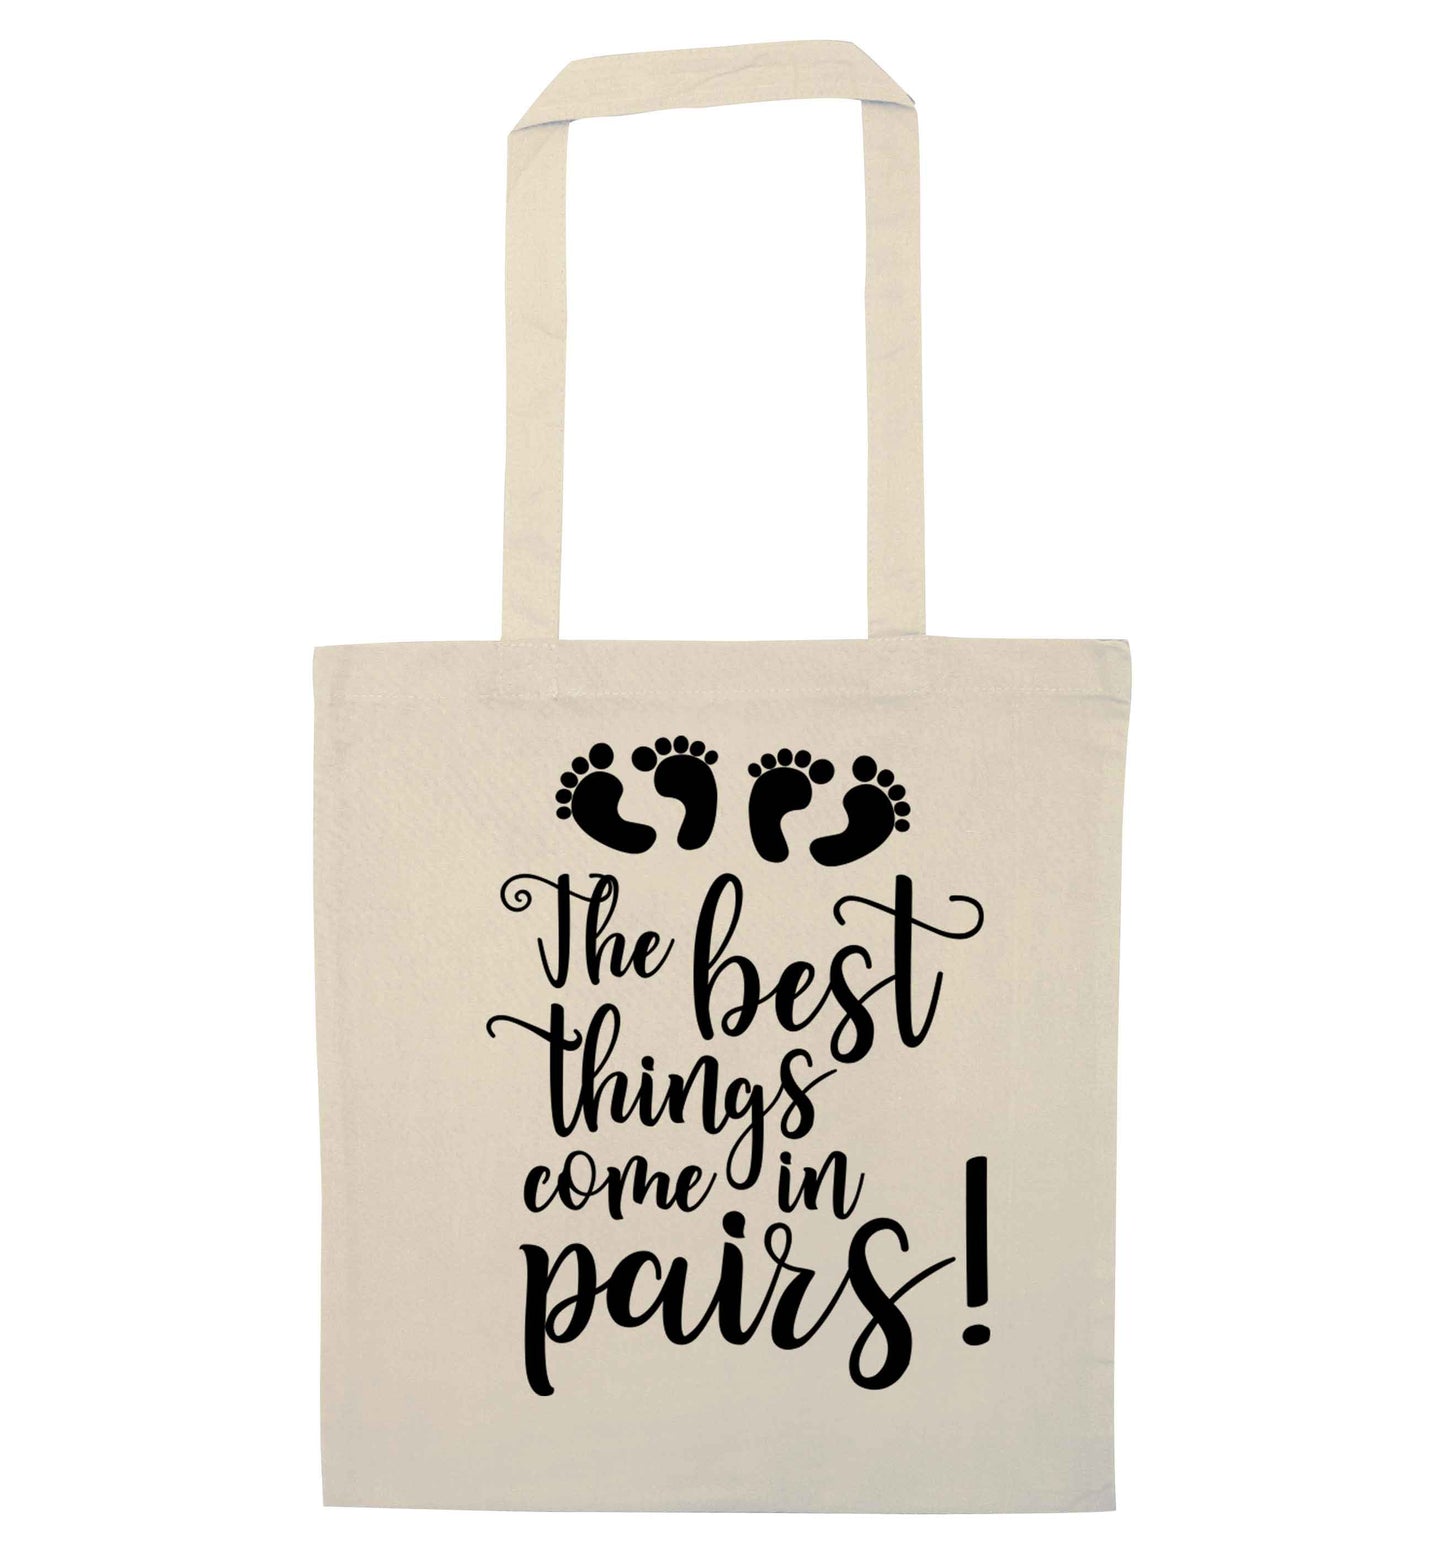 The best things come in pairs! natural tote bag